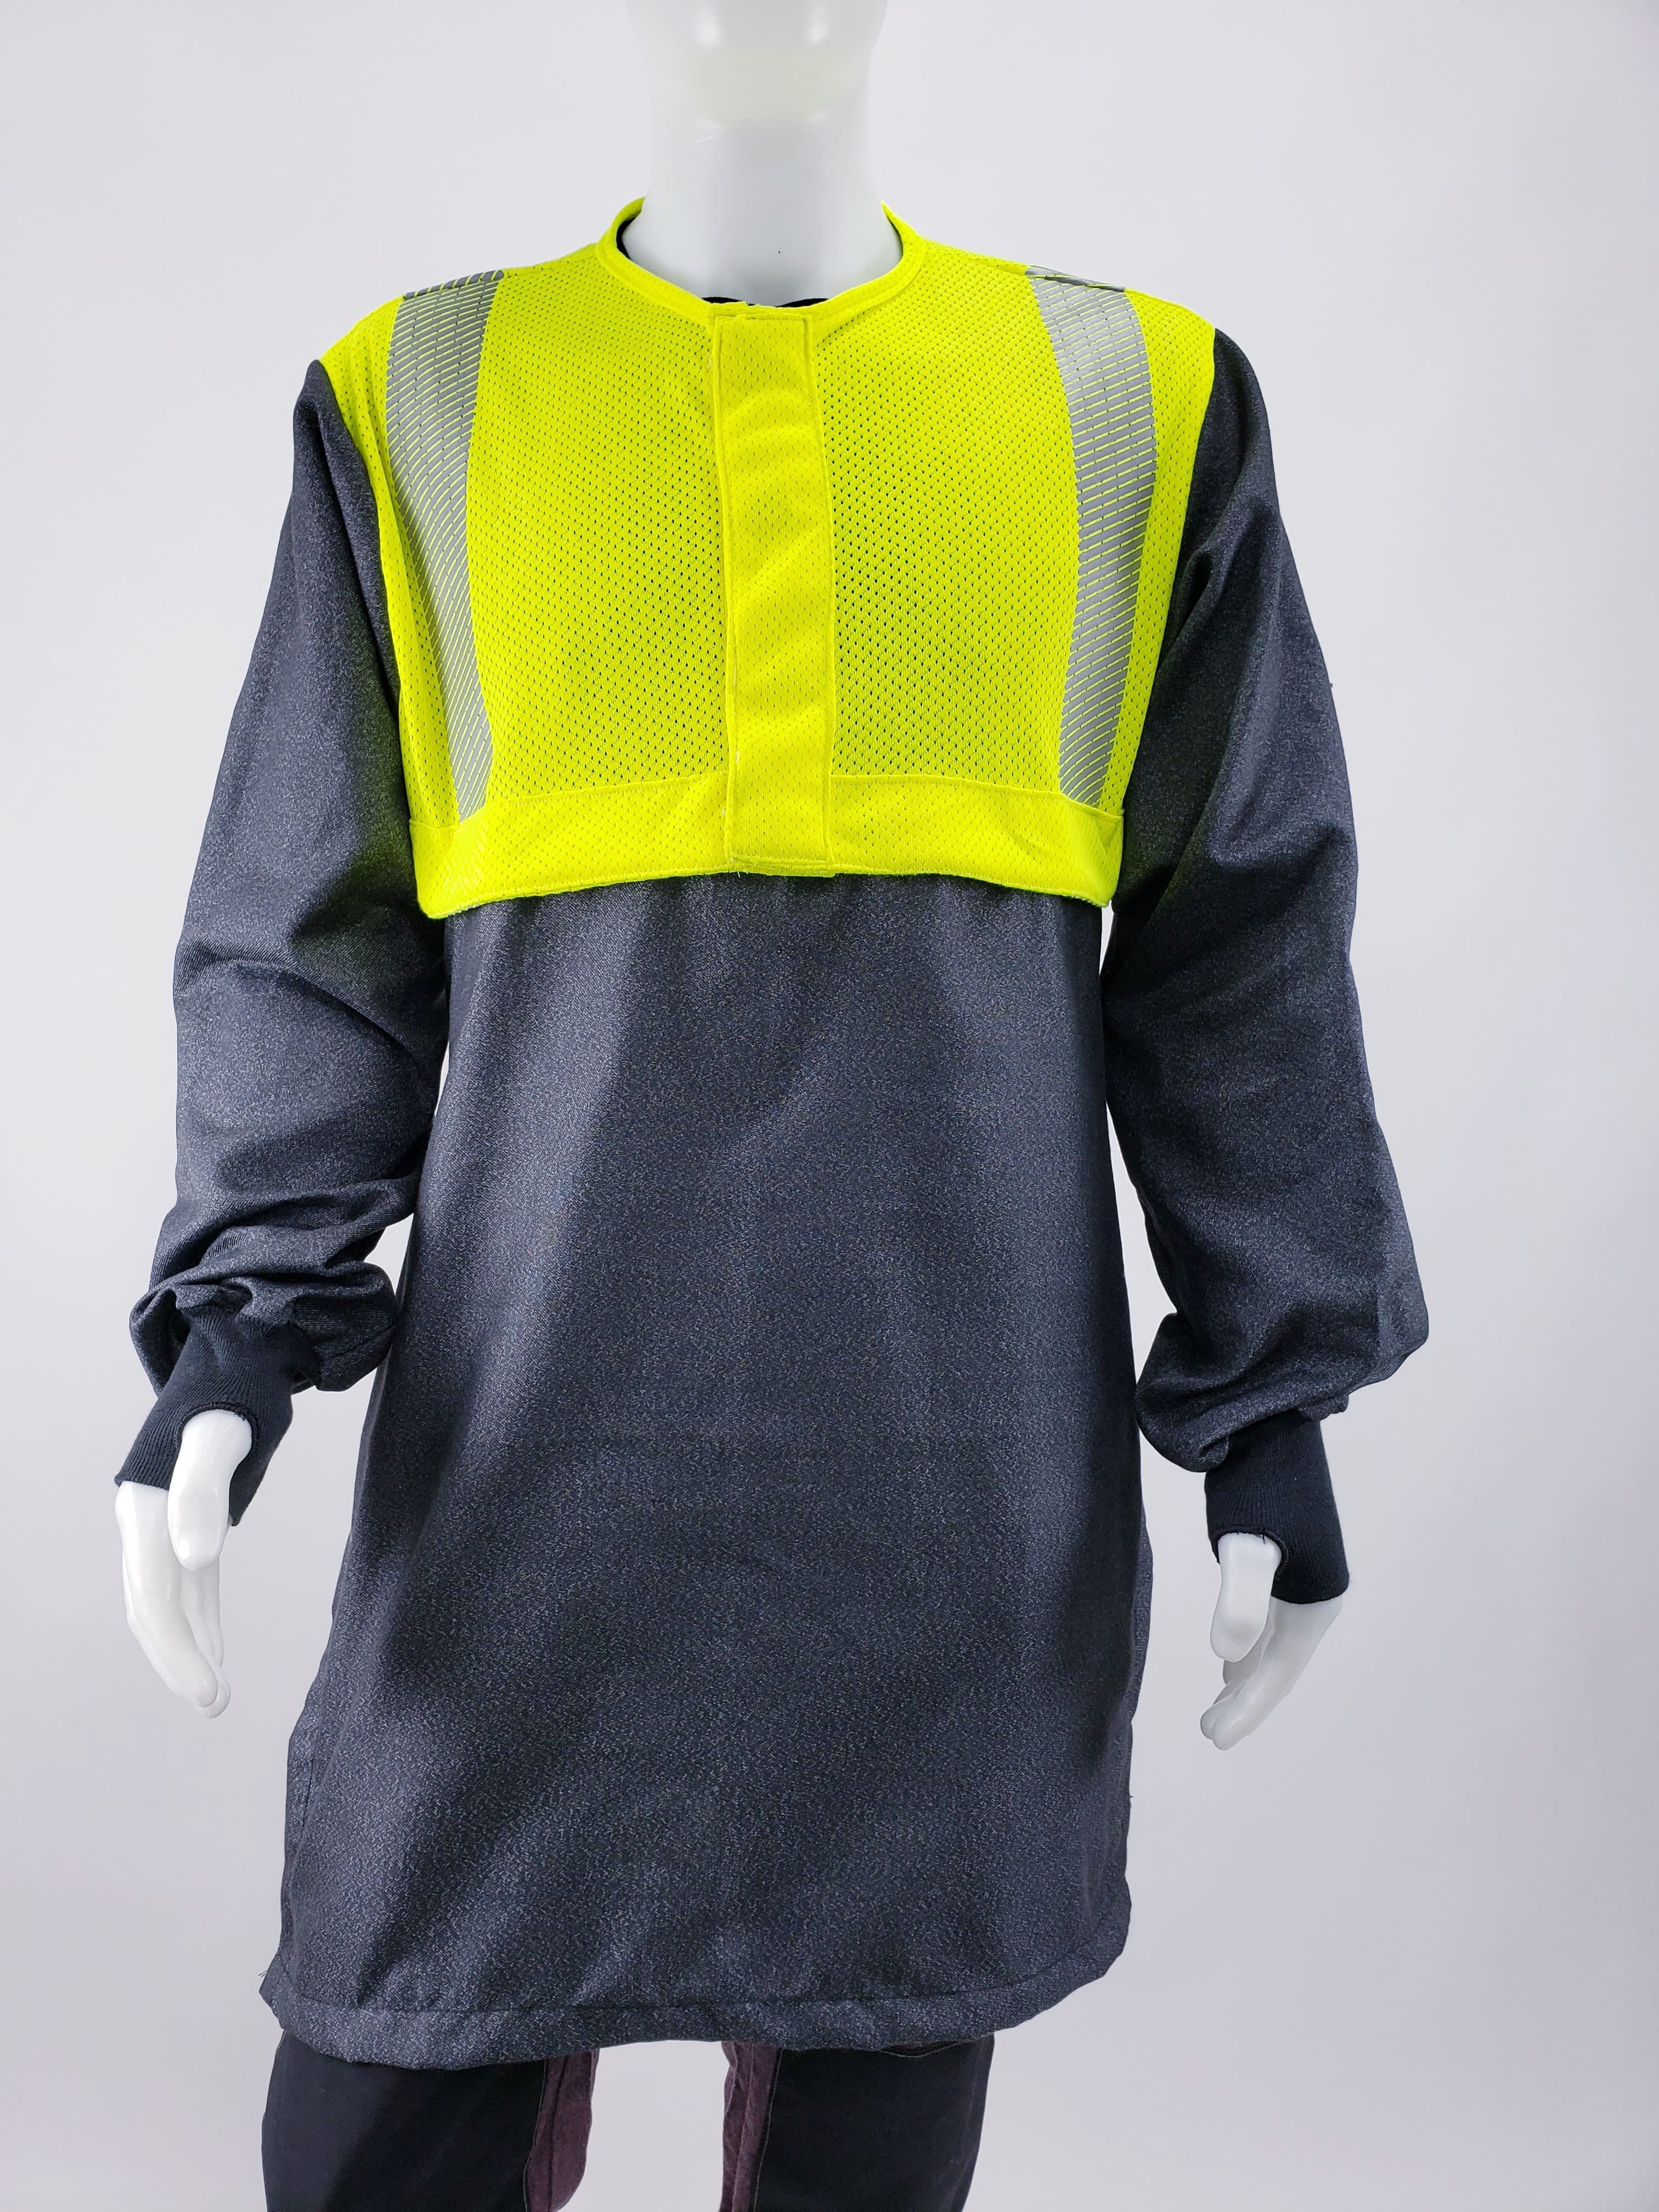 Cape Sleeves & Bibs for Cut & Puncture Protection